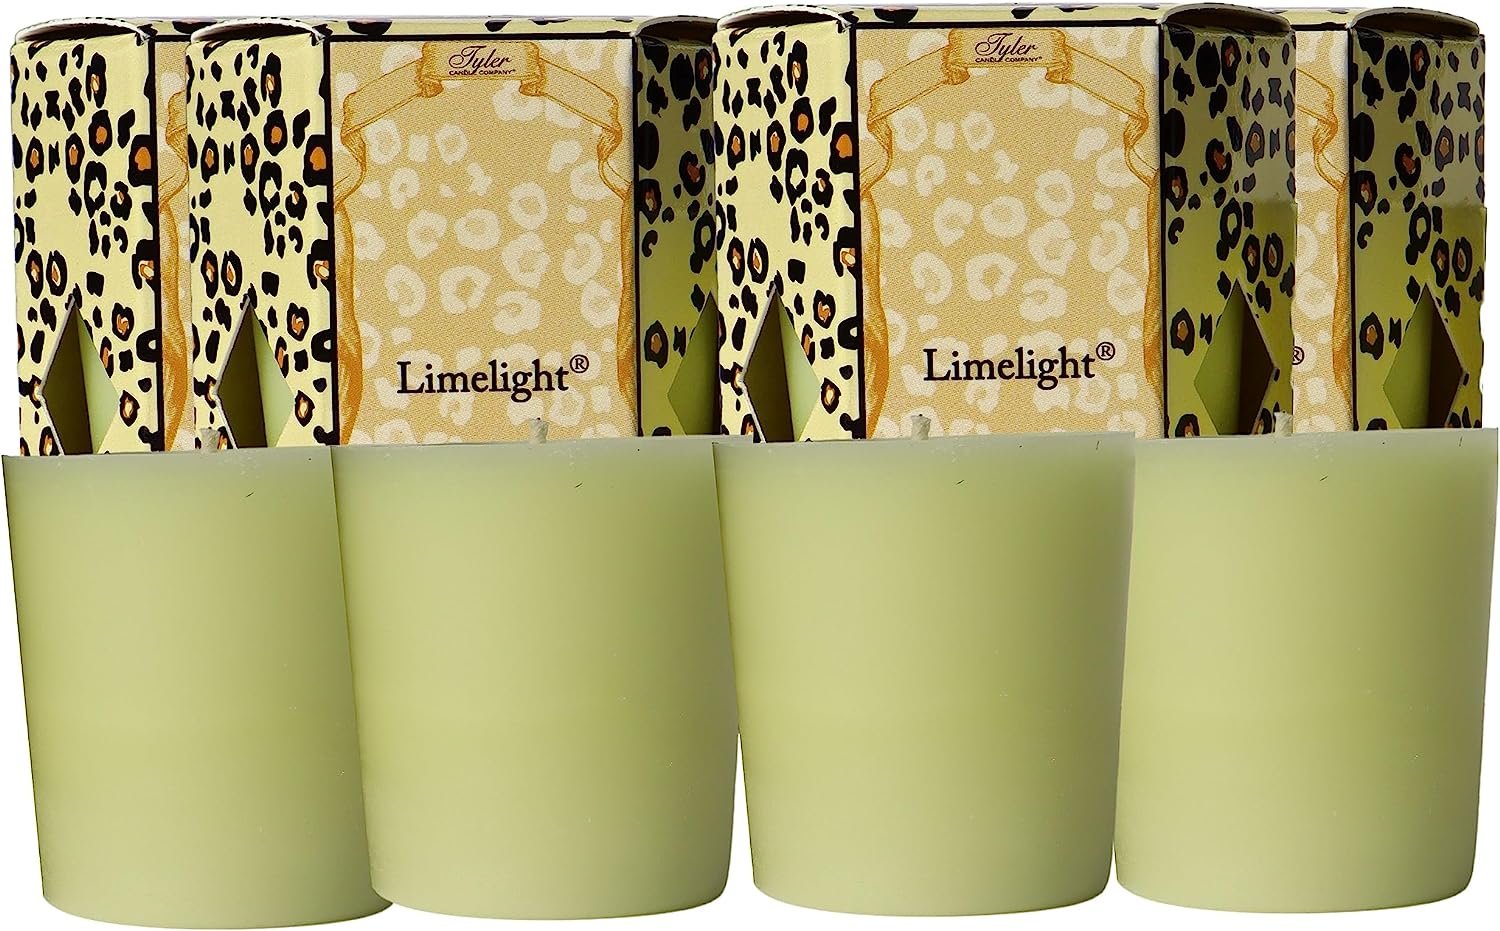 Tyler Candle Company Limelight Votive Candles - Luxury Scented Candle with Essential Oils - 4 Pack of 2 oz Small Candles with 15 Hour Burn Time Each - with Bonus Key Chain